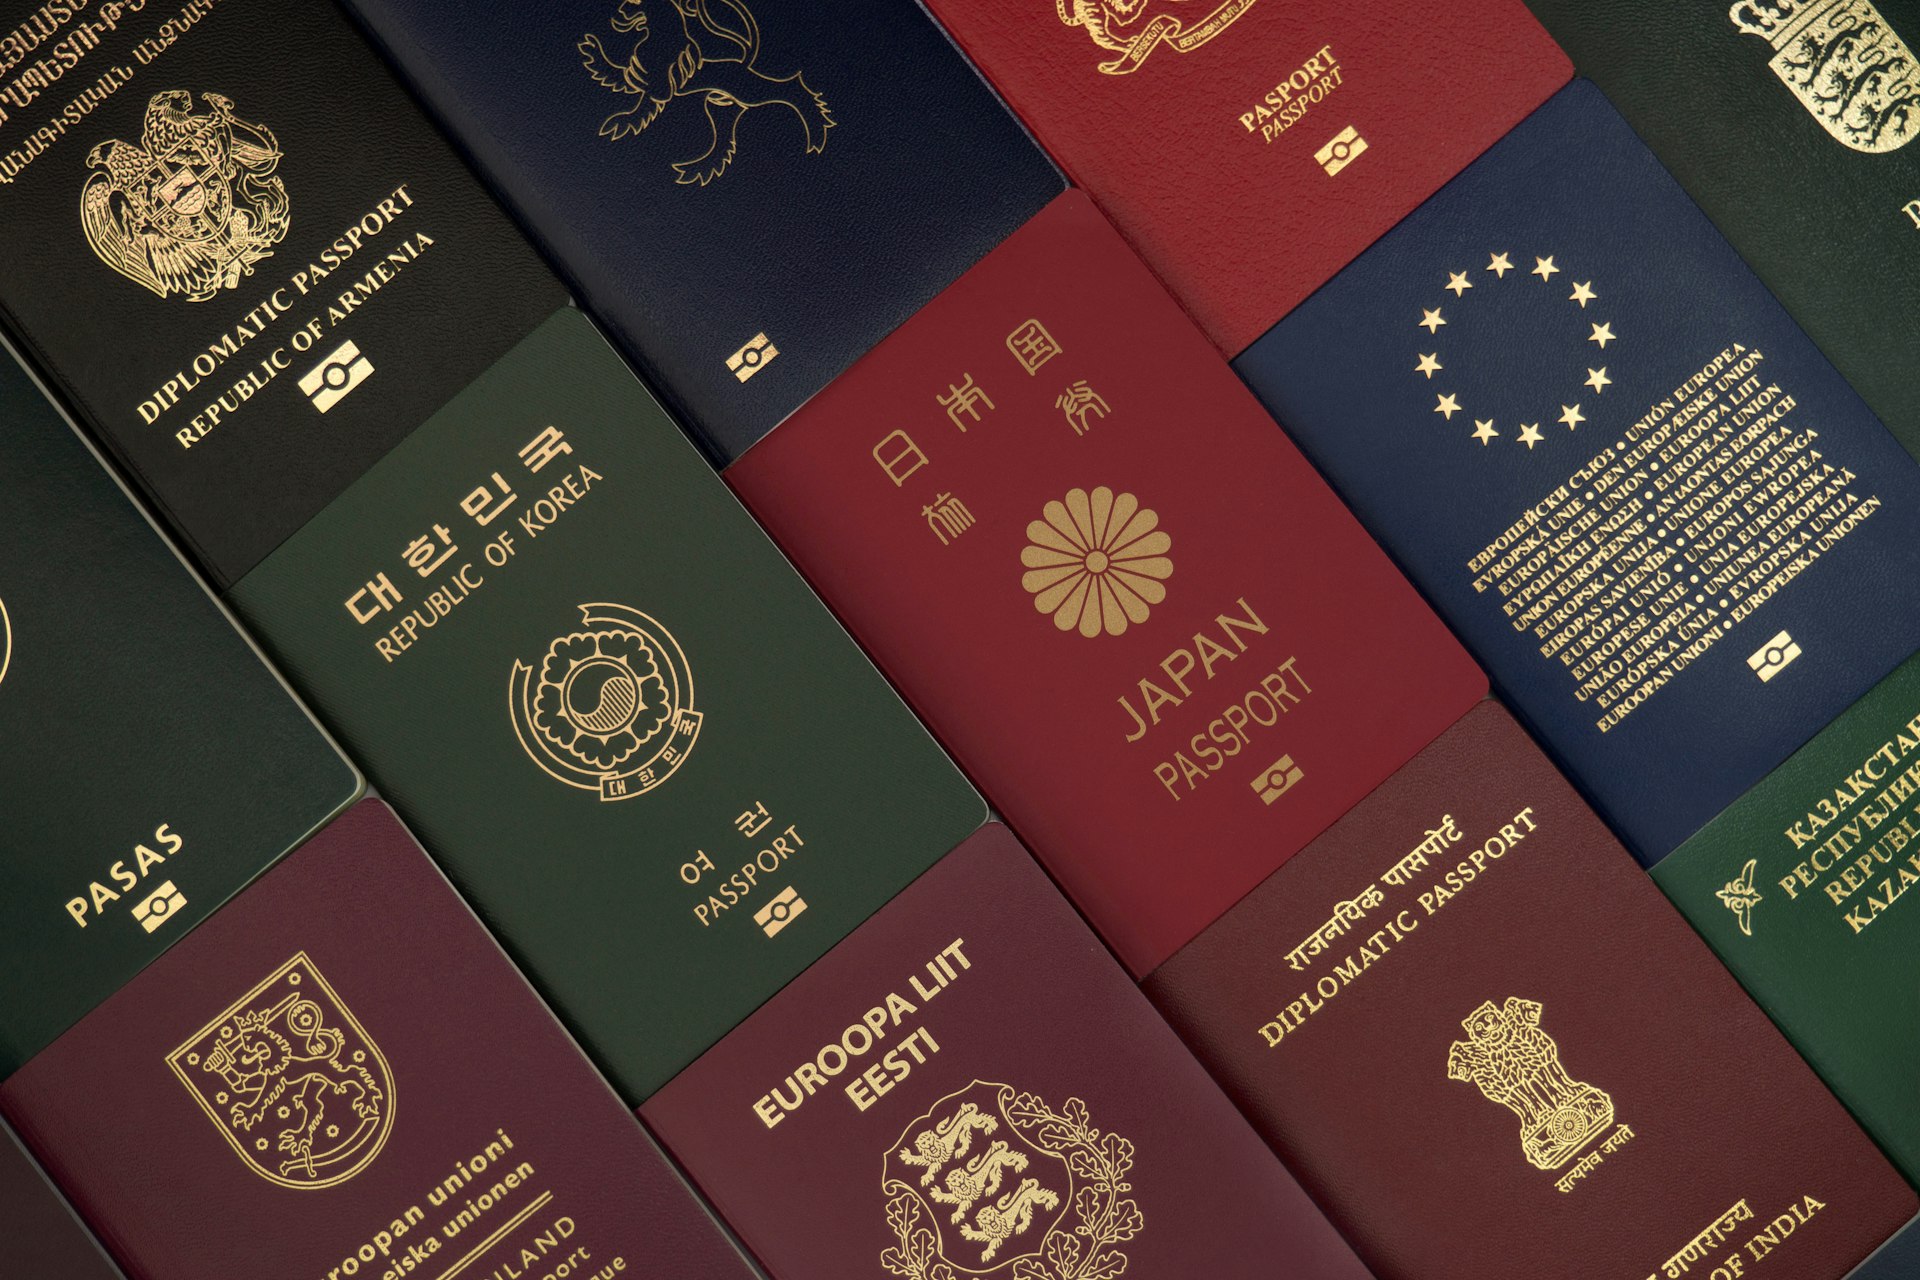 Different foreign passports from many countries as a colourful background